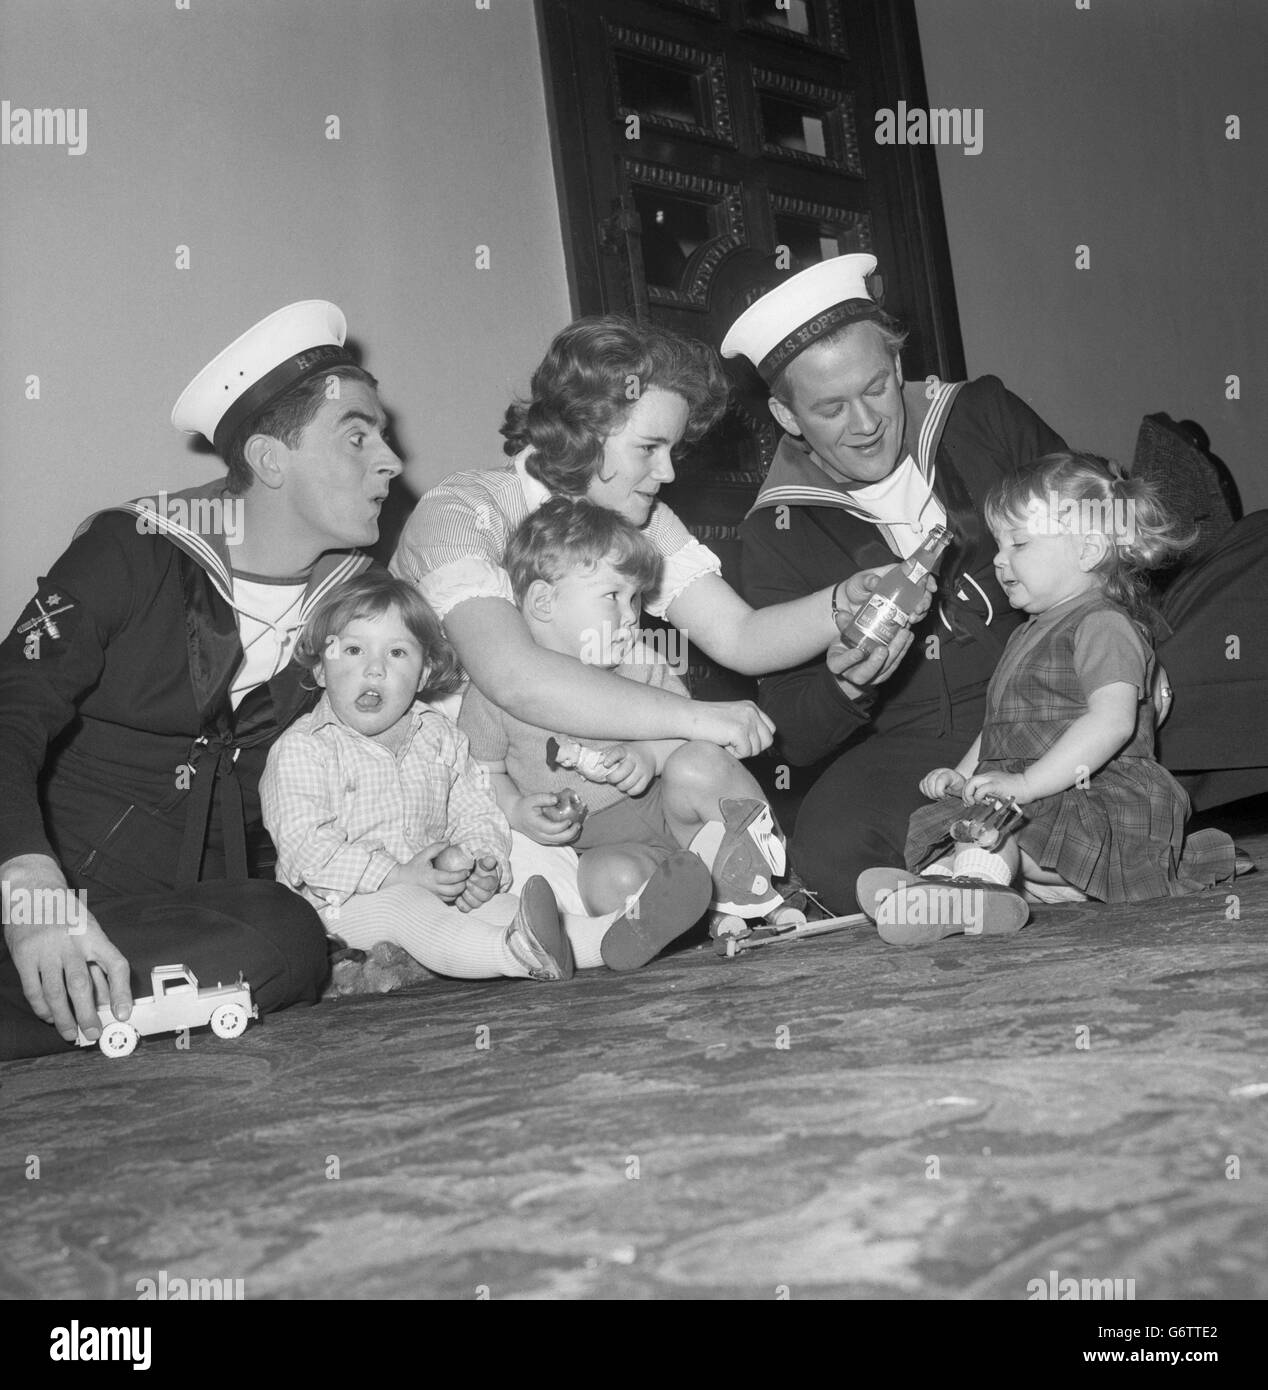 During the interval of comedy 'Rock-a-Bye Sailor', actors Ian MacNaughton (l) and Ian Curry visit a special nursery to entertain children and the nannie, 20-year-old Annette Miller, at the Phoenix Theatre in Charing Cross Road, London. The youngsters are (from l-r) Katie McKenzie, Simon Bentley and Janie Karen Mills, all two years old. The nursery has been set up to enable mothers to attend the matinees performance of the comedy show. Stock Photo